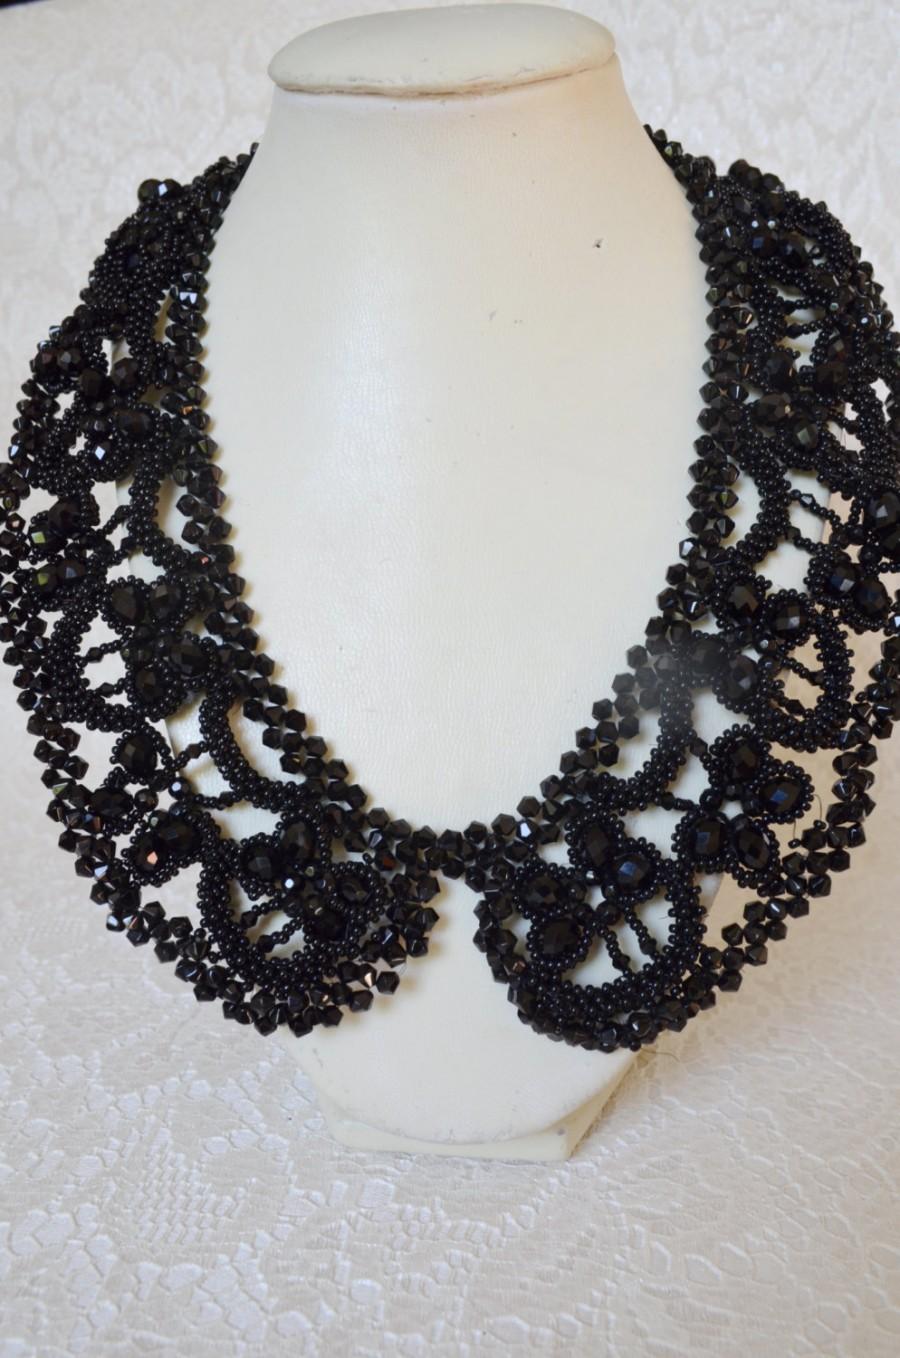 Hochzeit - Black Statement Collar Necklace, Beaded Necklace, Seed Bead Necklace, Beading Necklace, Holiday Necklace, Beadwoven, Gift for Her